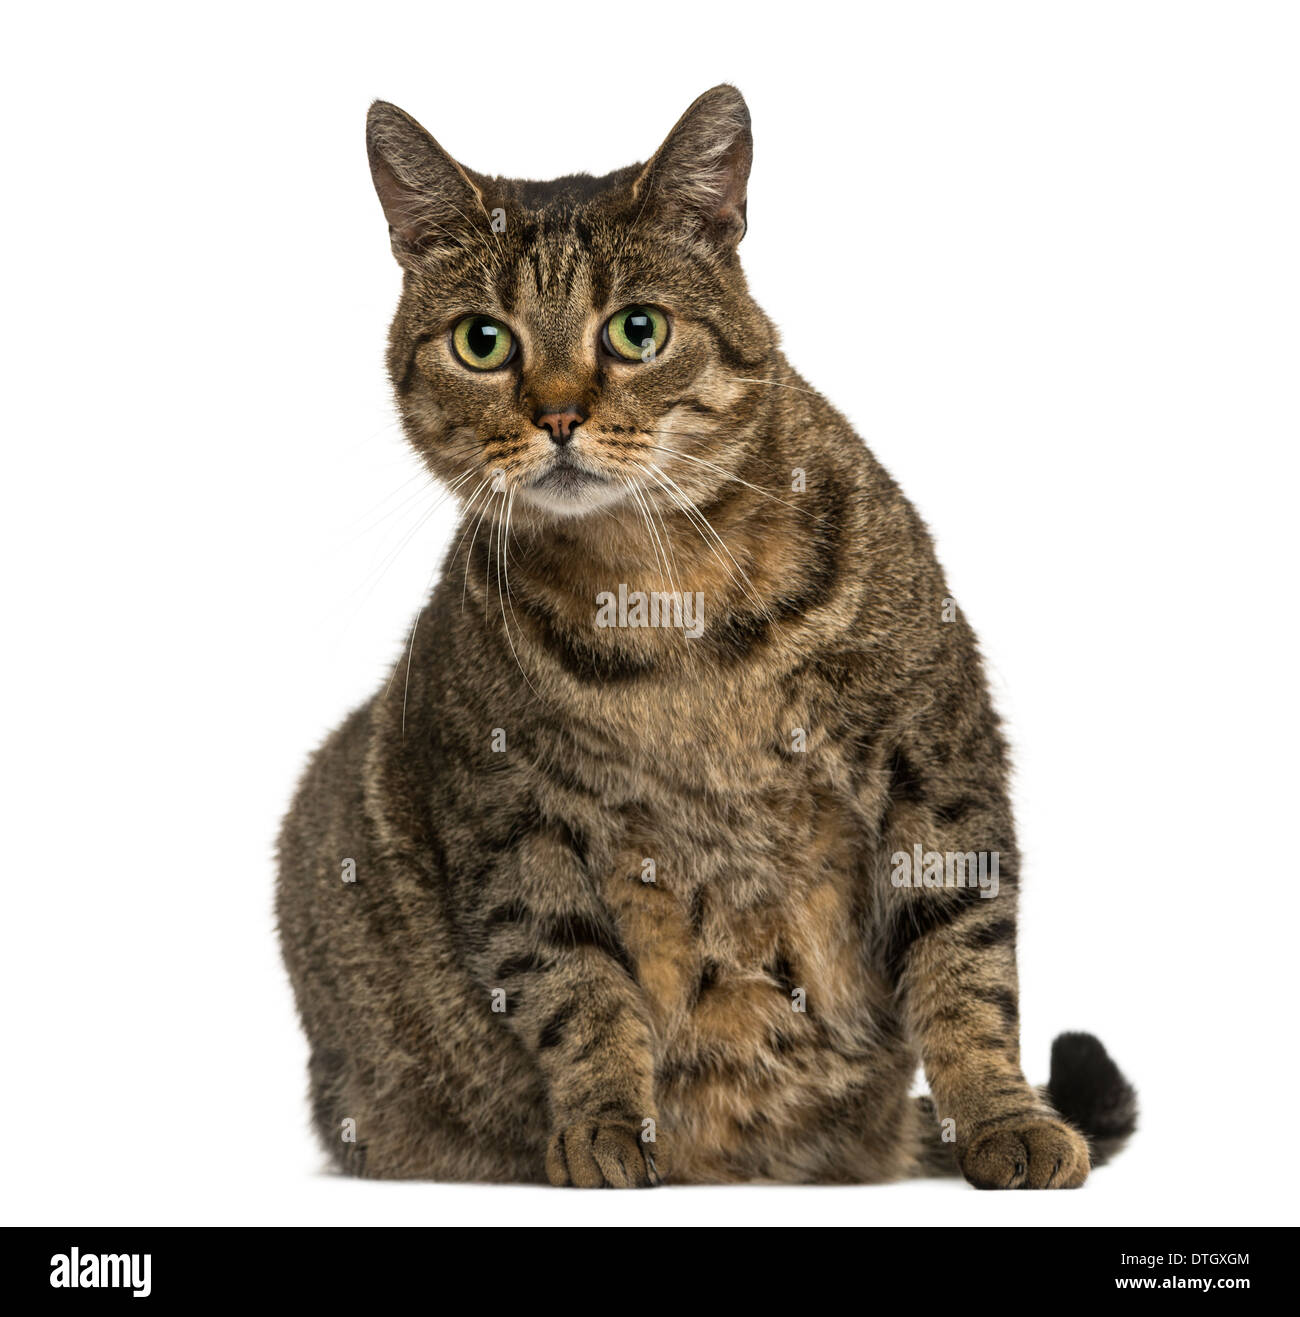 European shorthair cat sitting, looking at the camera, against white background Stock Photo